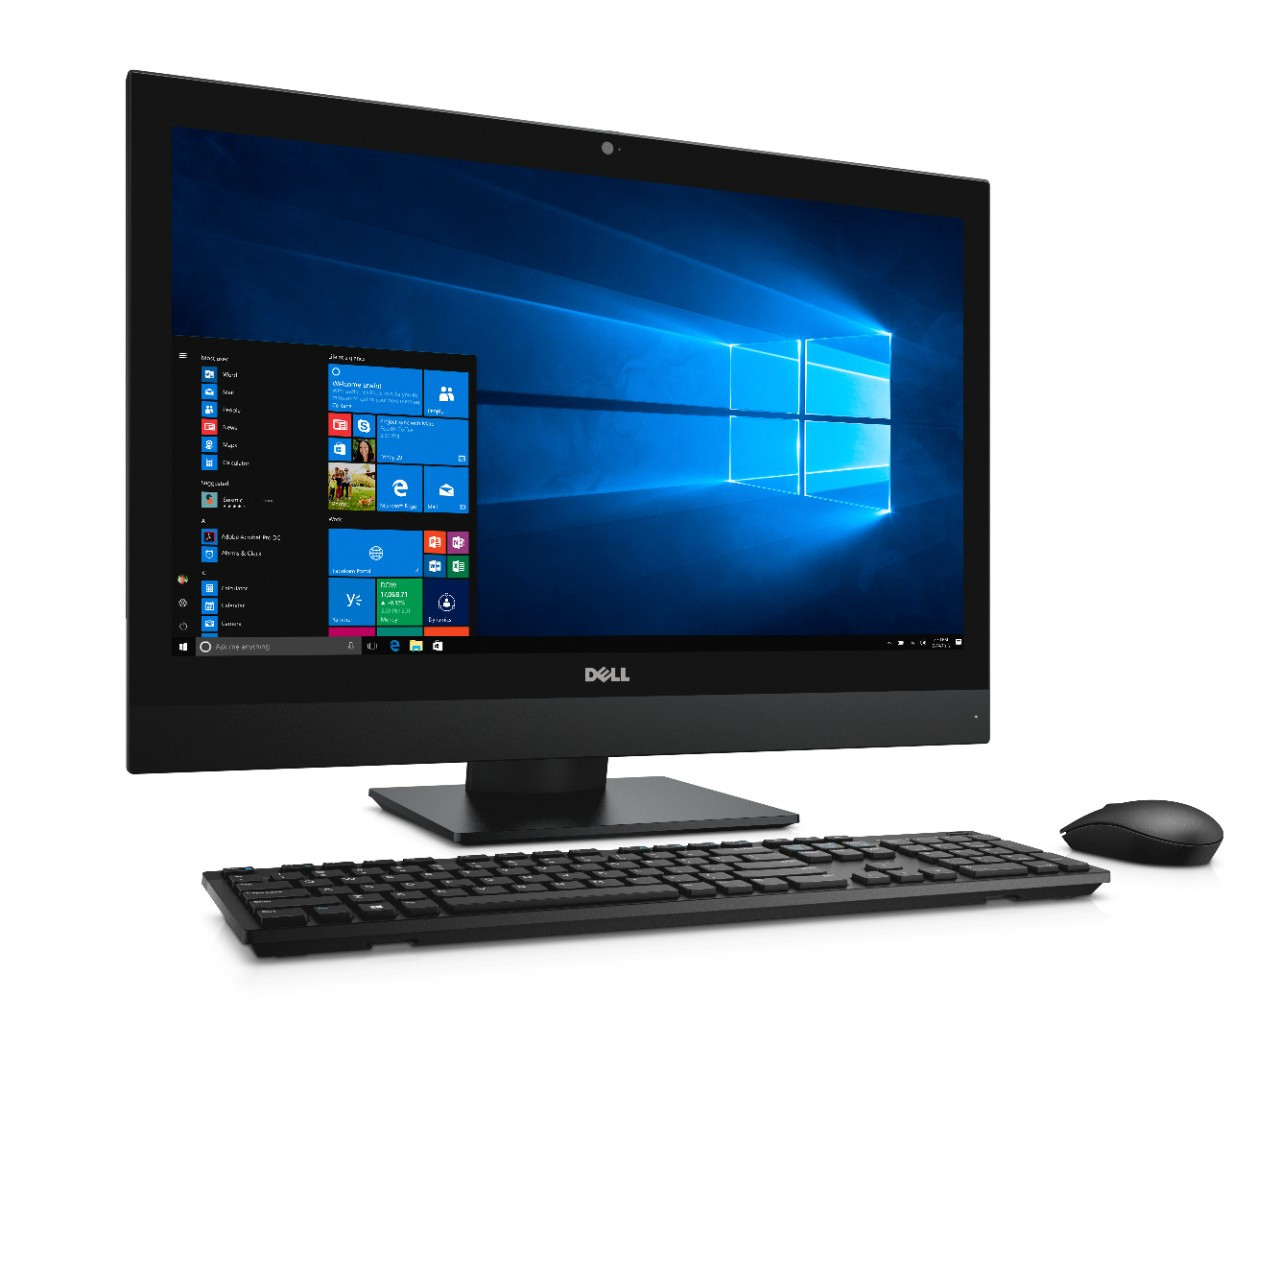 DELL OptiPlex 7450 3.4GHz i5-7500 23.8" 1920 x 1080pixels Touchscreen Black All-in-One PC